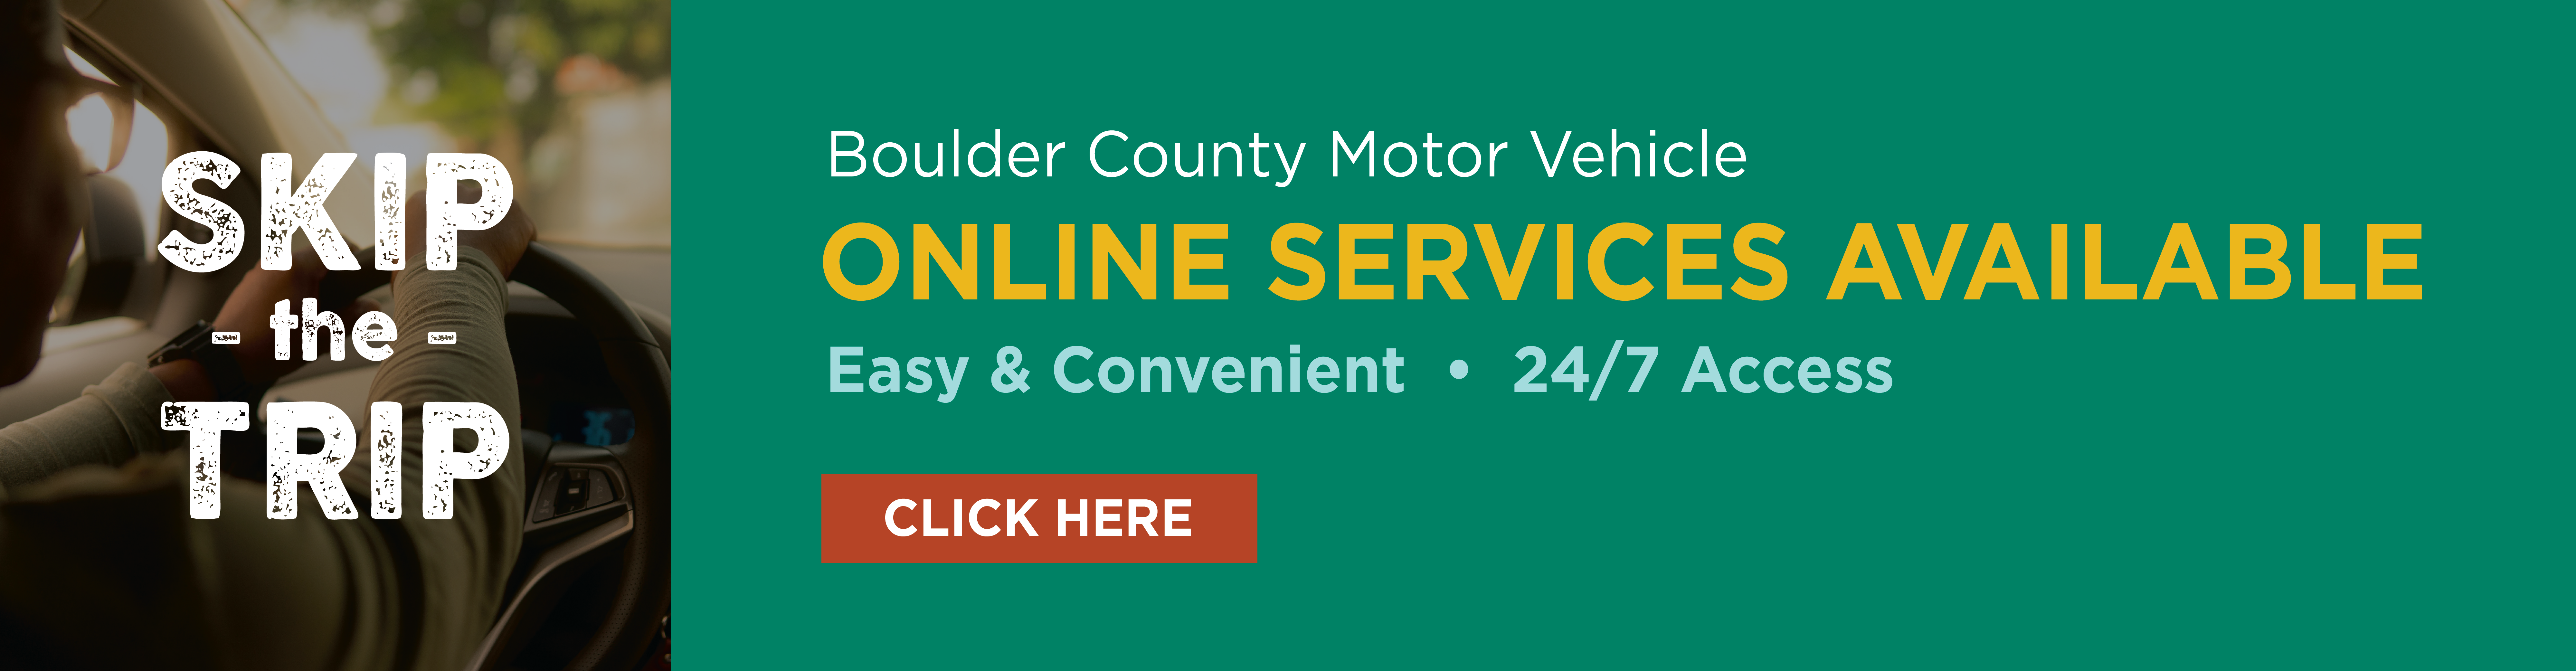 Motor vehicle online services available 24/7. Click here.